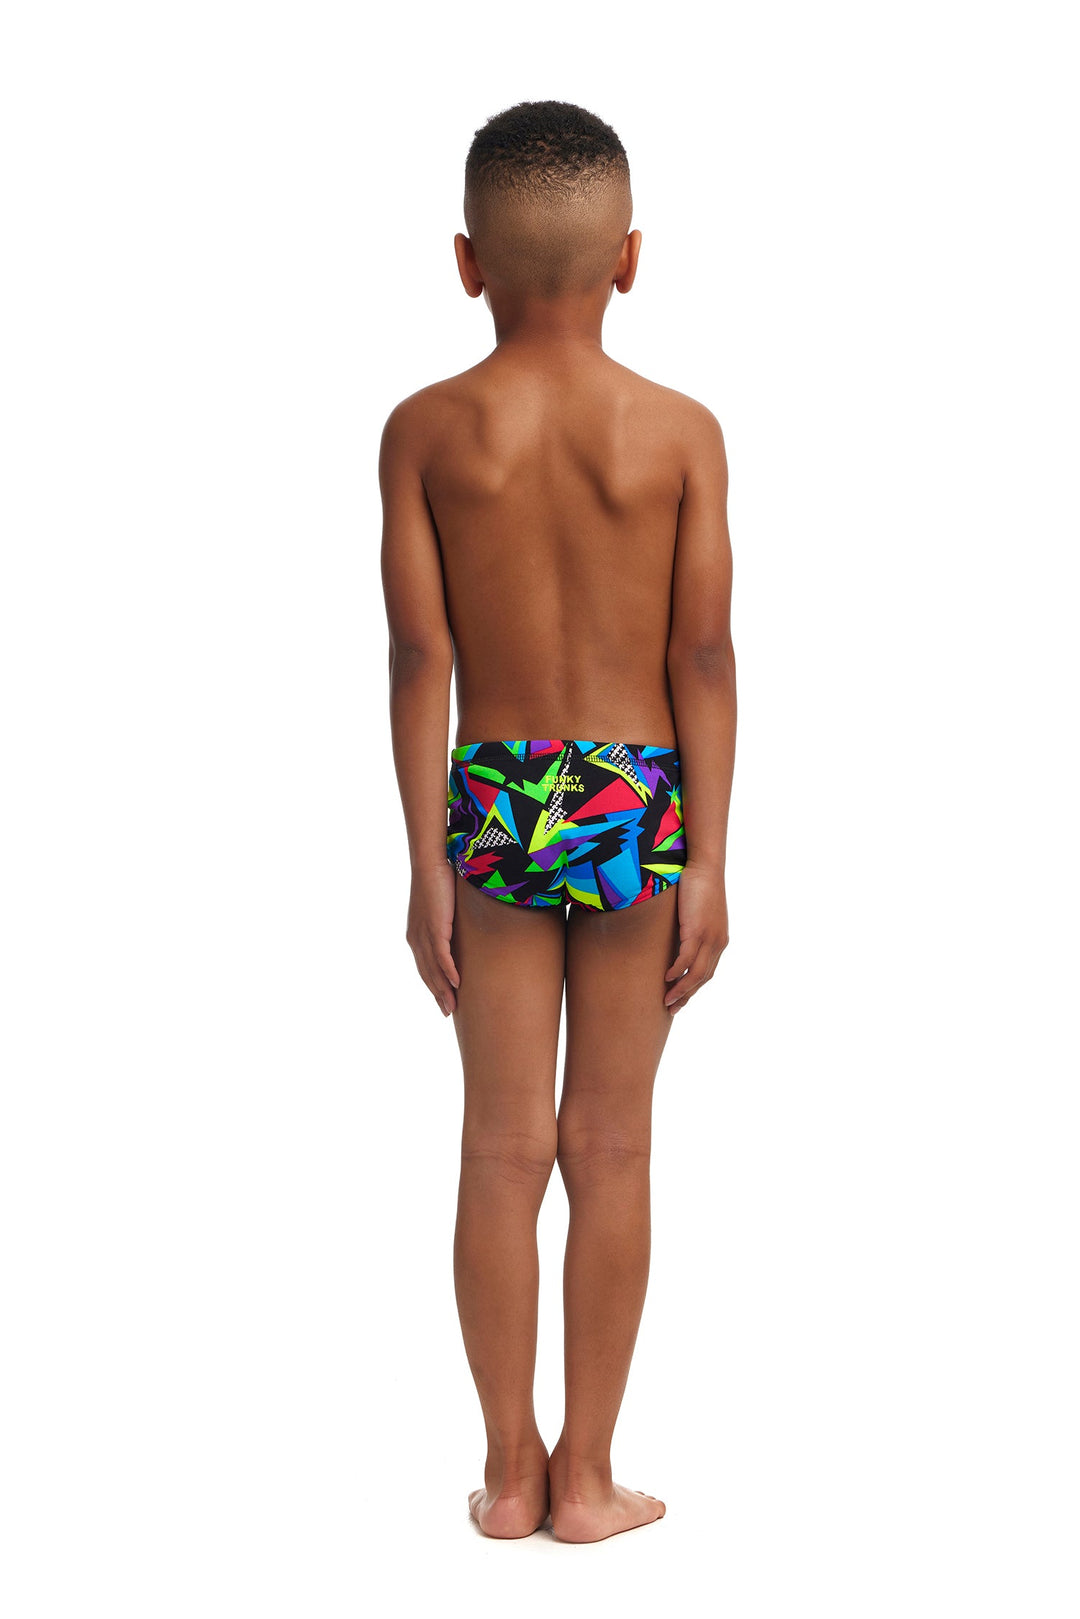 Beat It Print Trunk Box Swimsuit FT32T - Toddler Ages 1-7